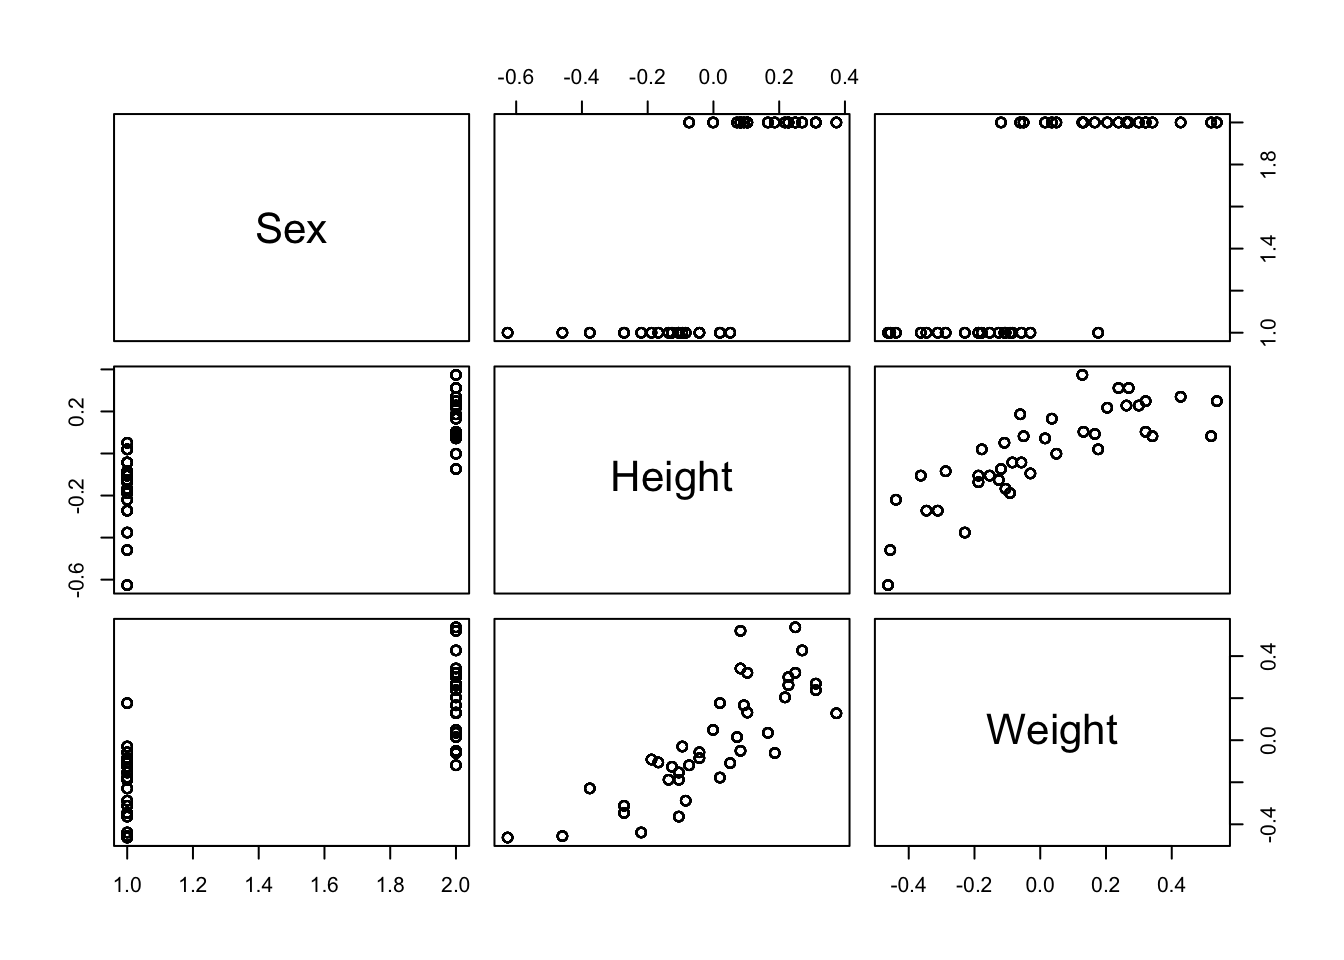 The combinations of sex, height and weight variables for the balance experiment.